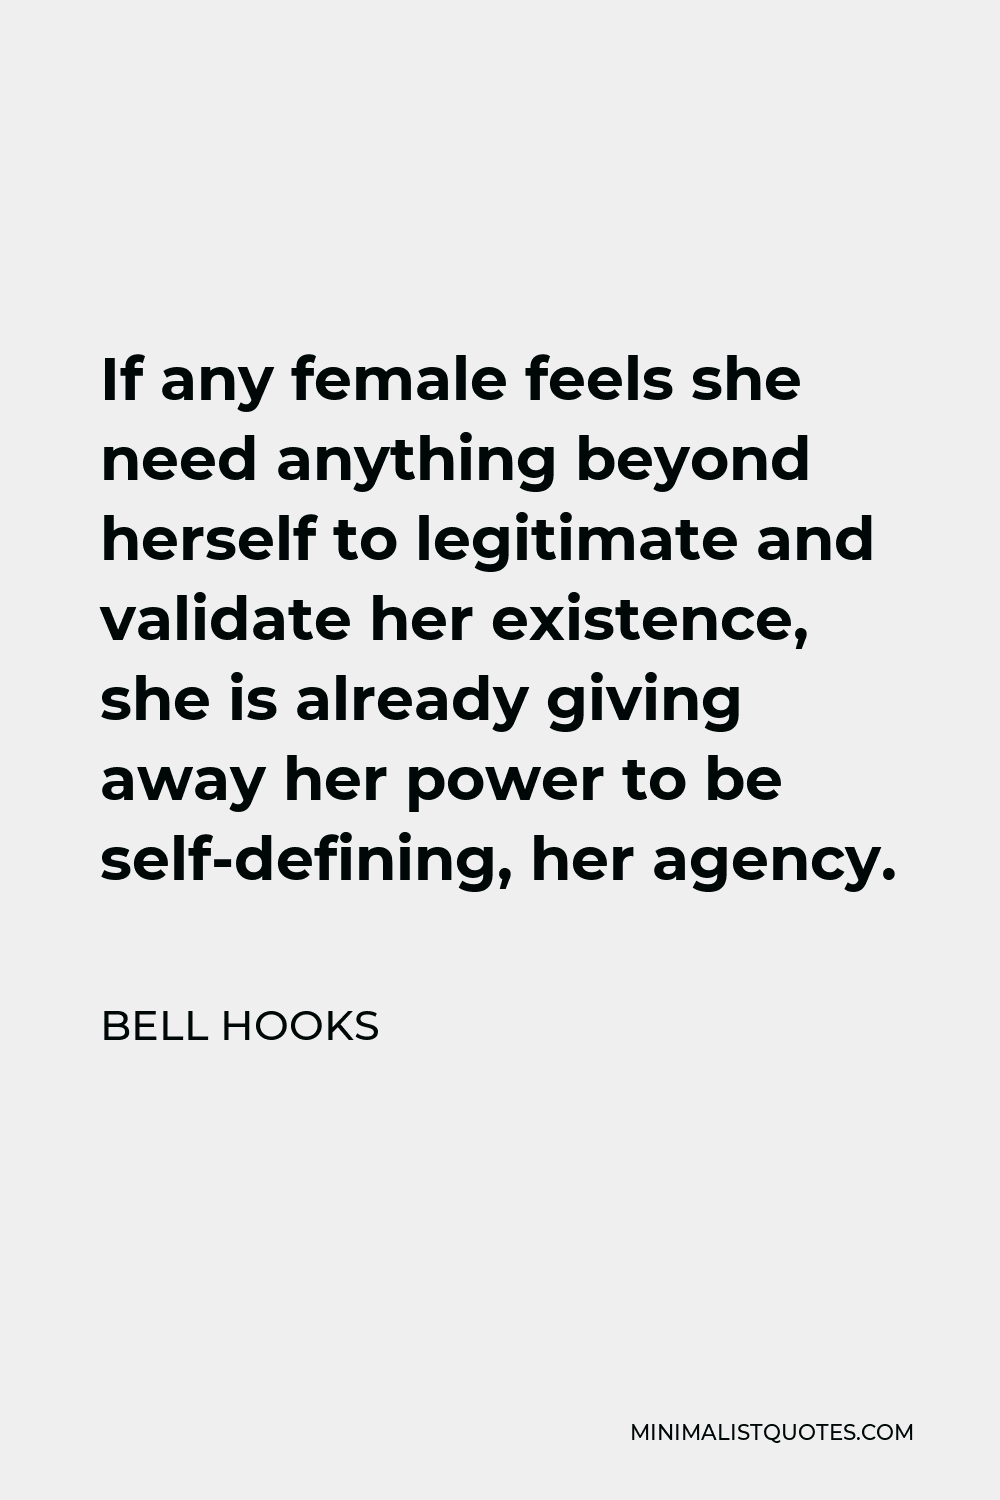 Bell Hooks Quote - If any female feels she need anything beyond herself to legitimate and validate her existence, she is already giving away her power to be self-defining, her agency.